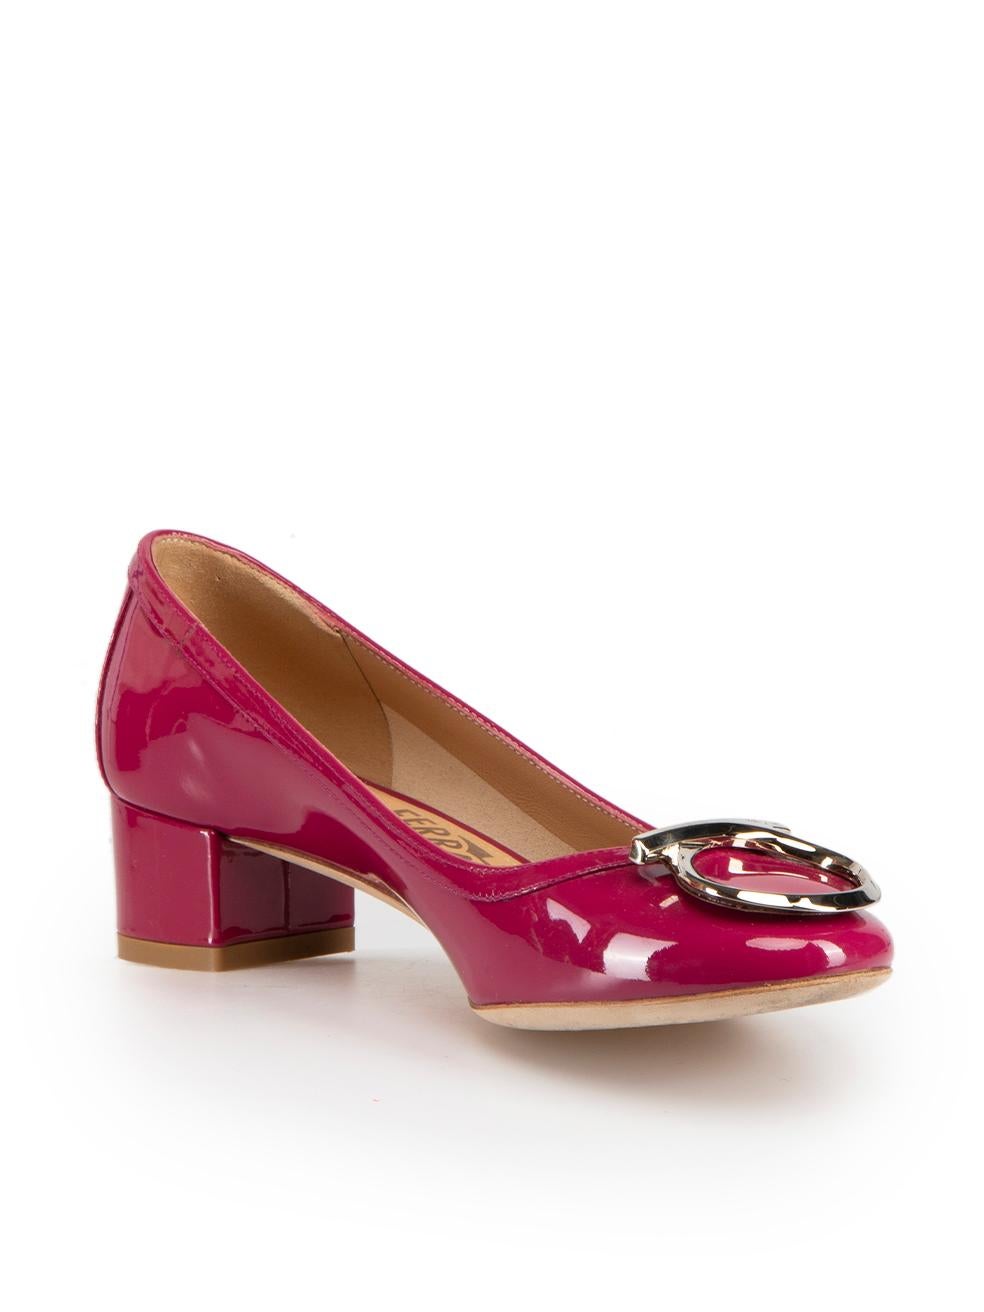 CONDITION is Very good. Hardly any visible wear to shoes is evident on this used Salvatore Ferragamo designer resale item. These shoes come with original box and dust bag.
 
 Details
 Gancini
 Fuchsia
 Patent leather
 Pumps
 Mid heel
 Slip on
